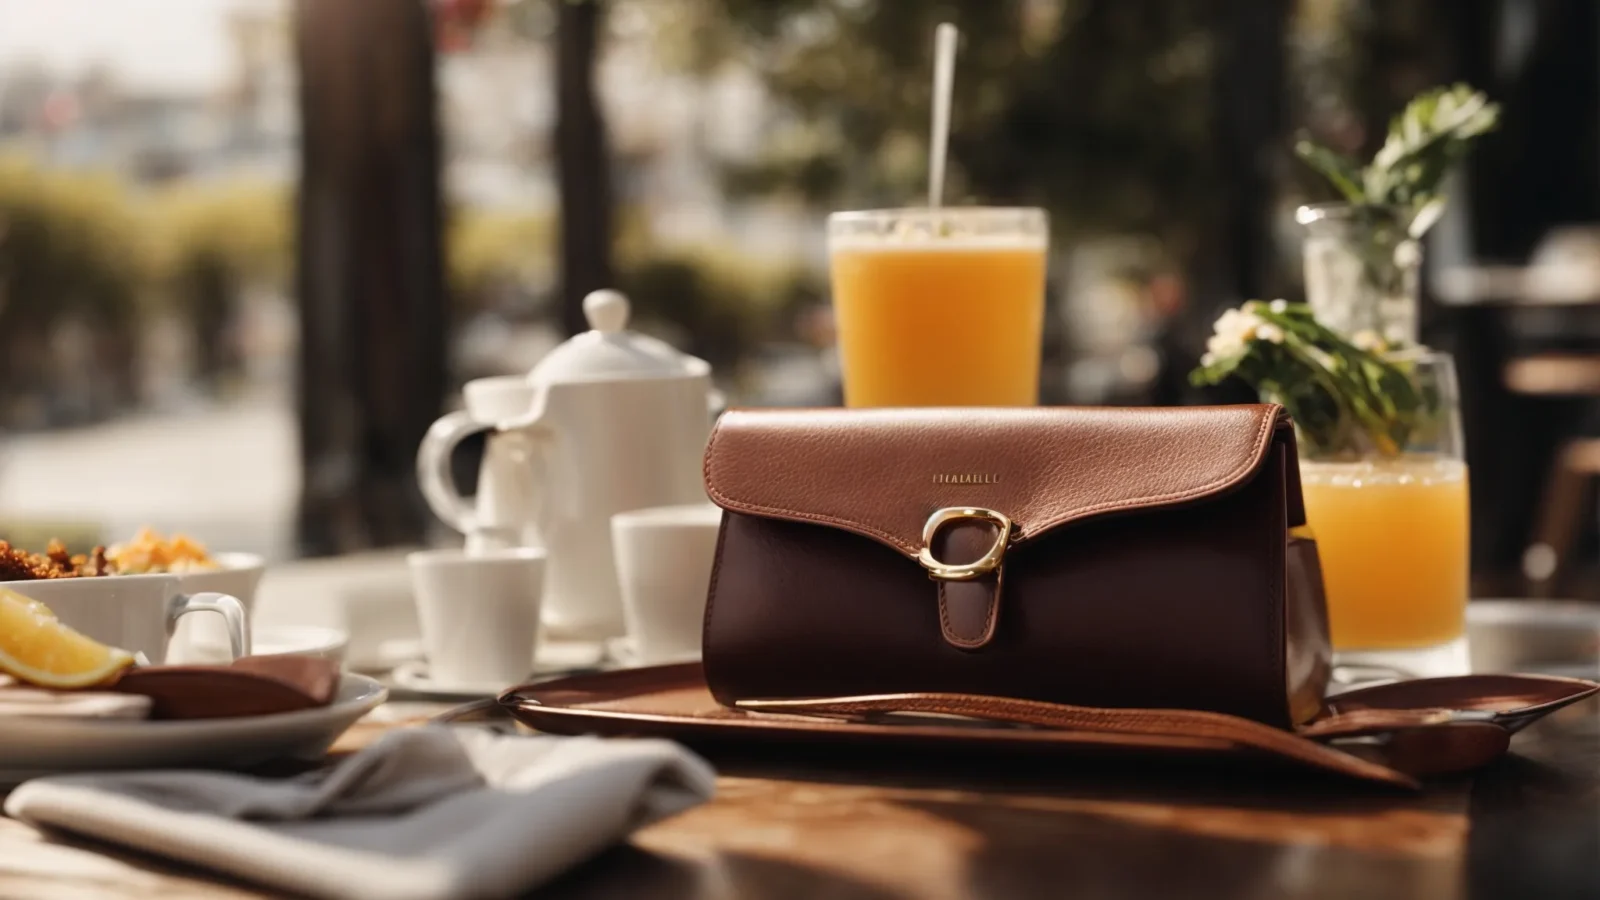 a pair of stylish sunglasses and a designer handbag sit on a chic café table, surrounded by an inviting brunch spread.